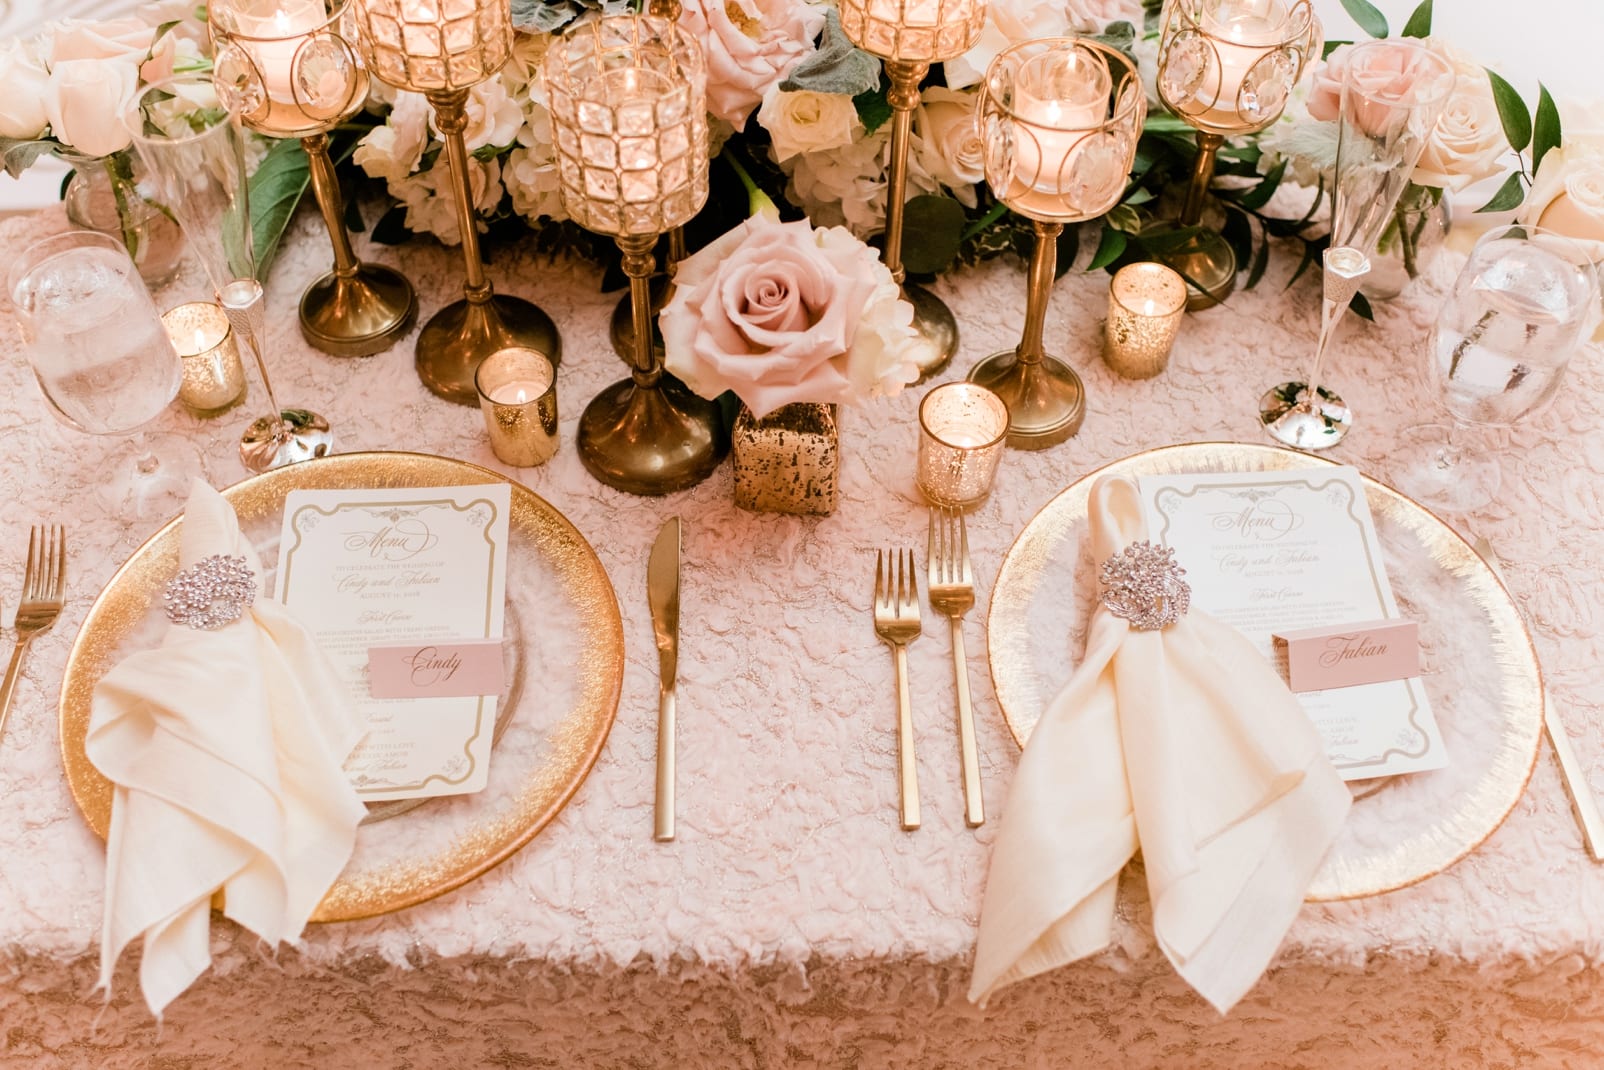 Grand Marquise Ballroom wedding reception table setting with gold rimmed clear chargers and candles photo